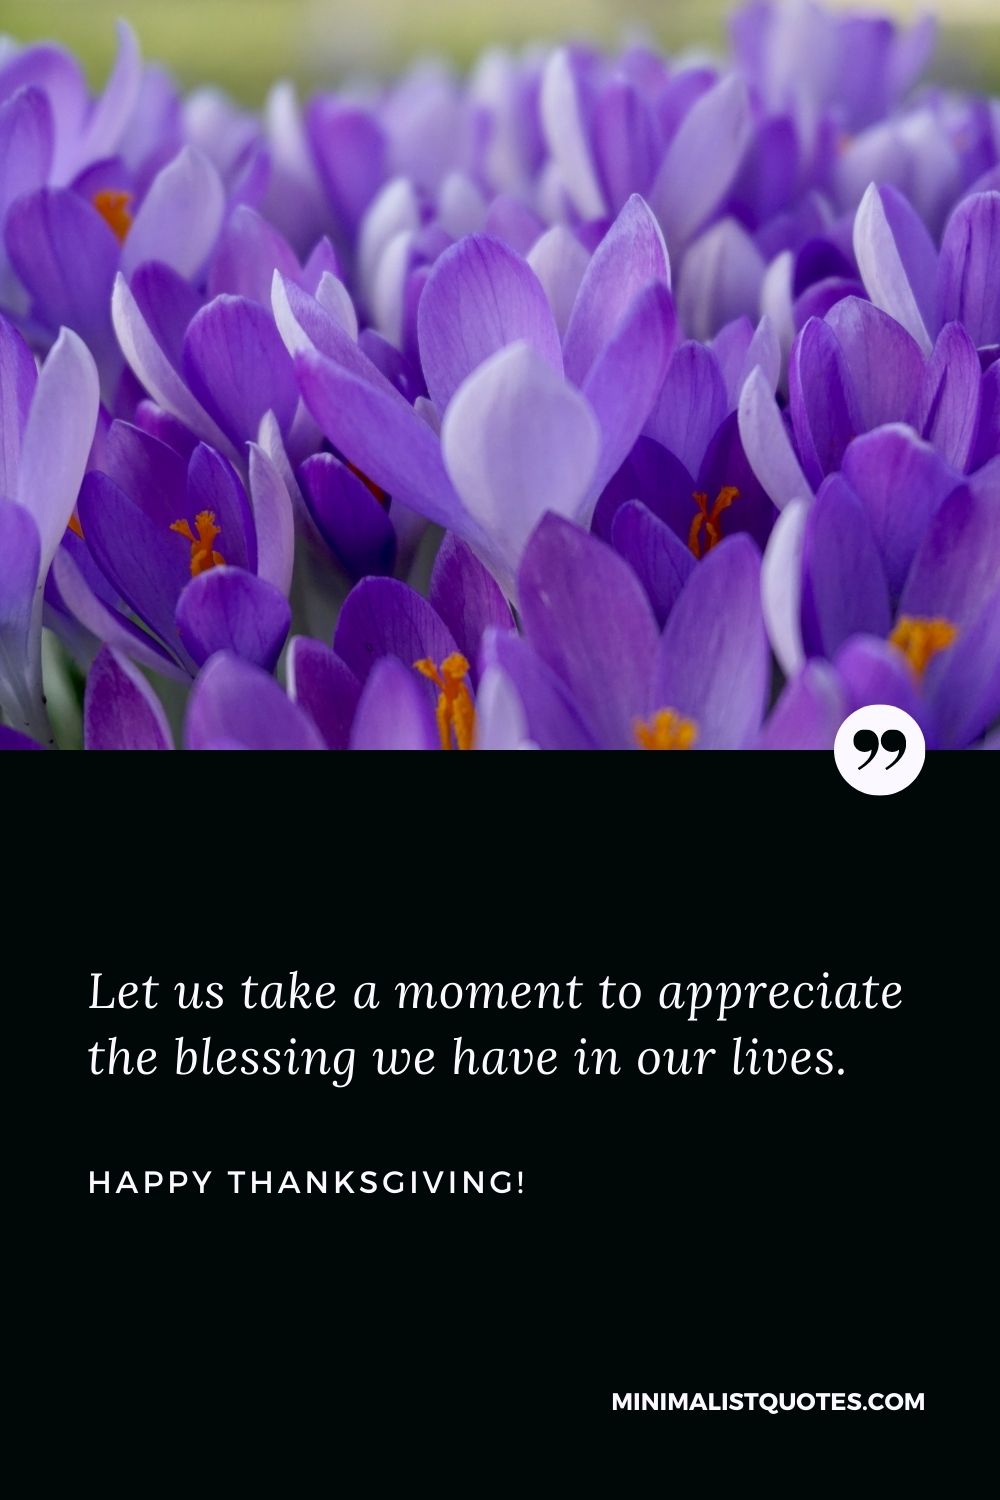 Thanksgiving message to colleagues: Let us take a moment to appreciate the blessing we have in our lives. Happy Thanksgiving!